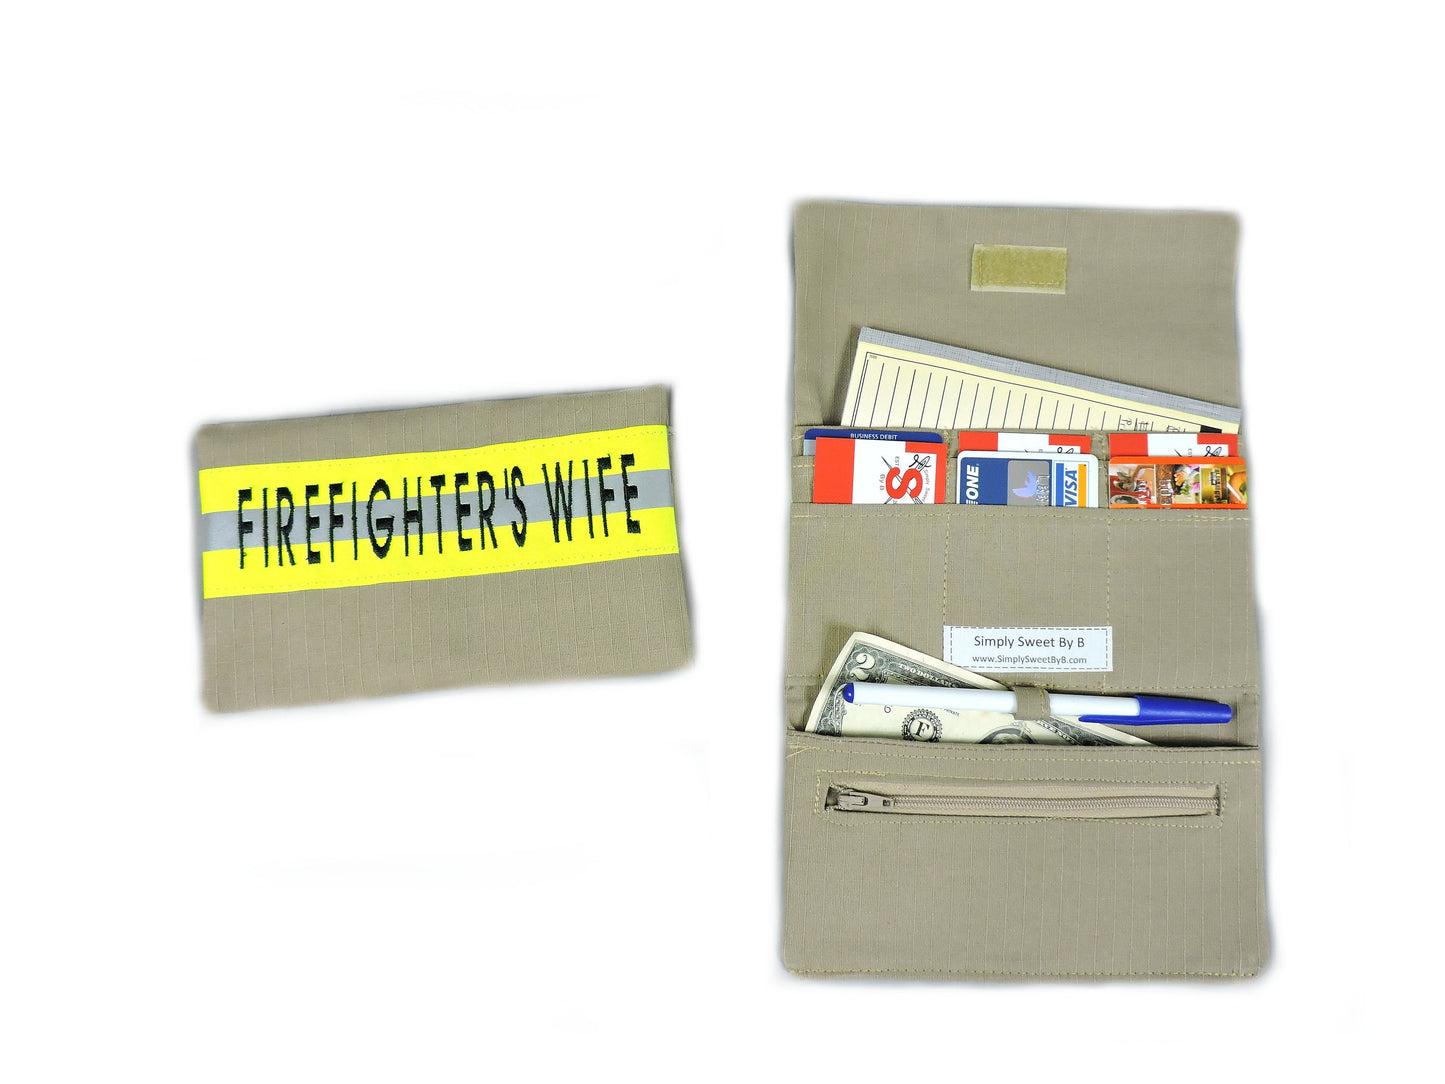 Firefighter wife fabric wallet